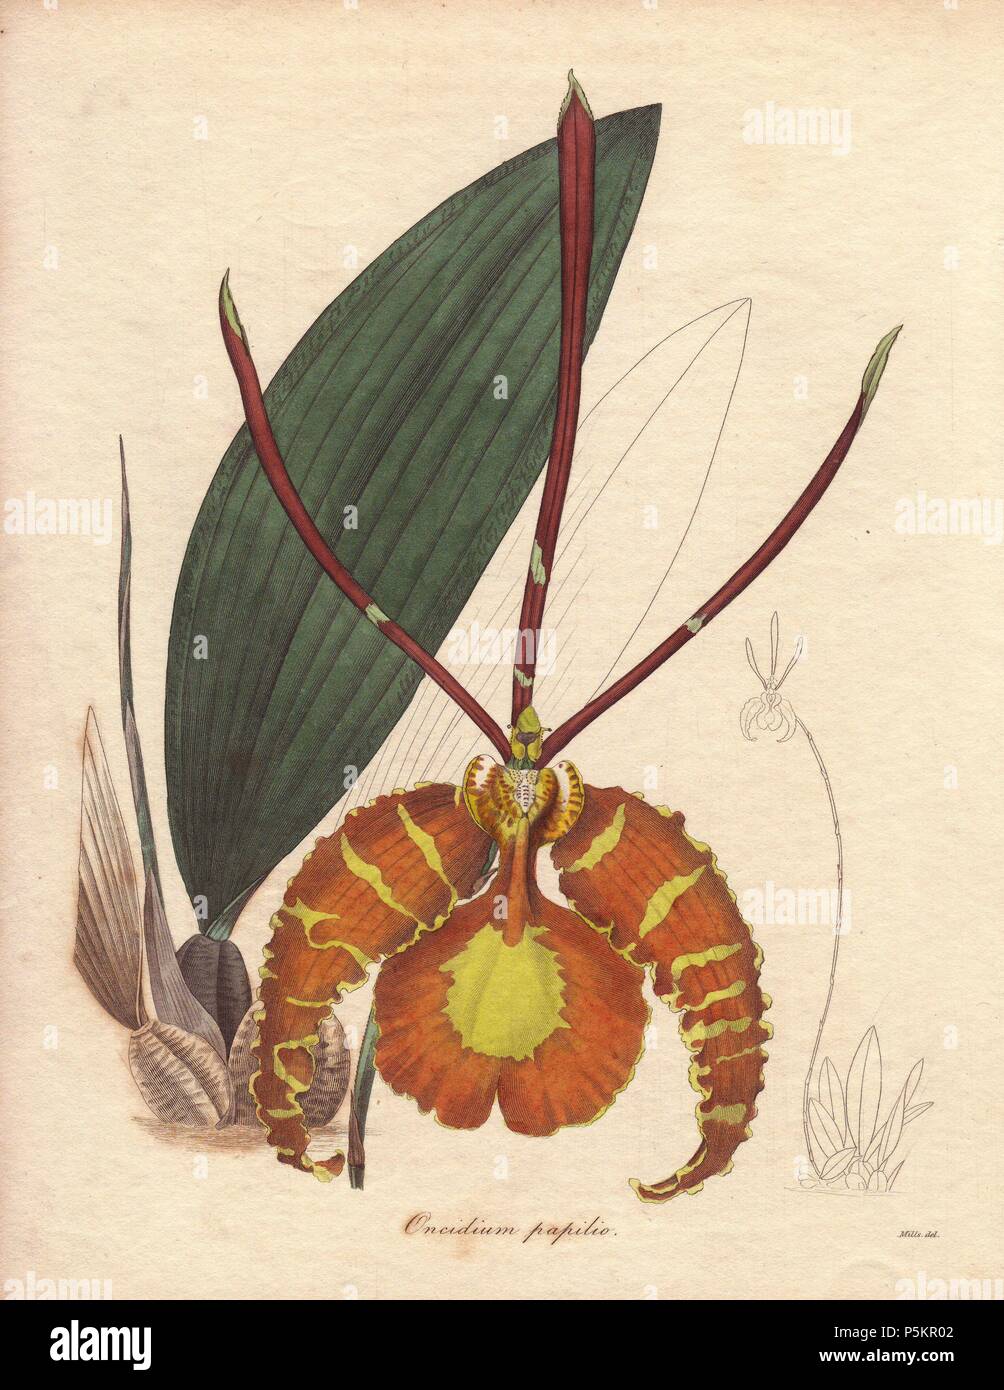 Psychopsis papilio or butterfly orchid is a native of South America and Trinidad with large yellow and reddish-brown flowers. . . Illustration by Miss R. Mills (active 1836~1842): she was also the main illustrator for Knowles and Westcott’s The Floral Cabinet (1837-1842). . . Benjamin Maund's The Botanist was a five-volume series that introduced 250 new plants from 1836 to 1842. The series is notable for its many female artists: the plates were drawn by Maund's daughters Sarah and Eliza, Augusta Withers, Priscilla Bury, Jane Taylor, Miss R. Mills among others. The other characteristic is parti Stock Photo